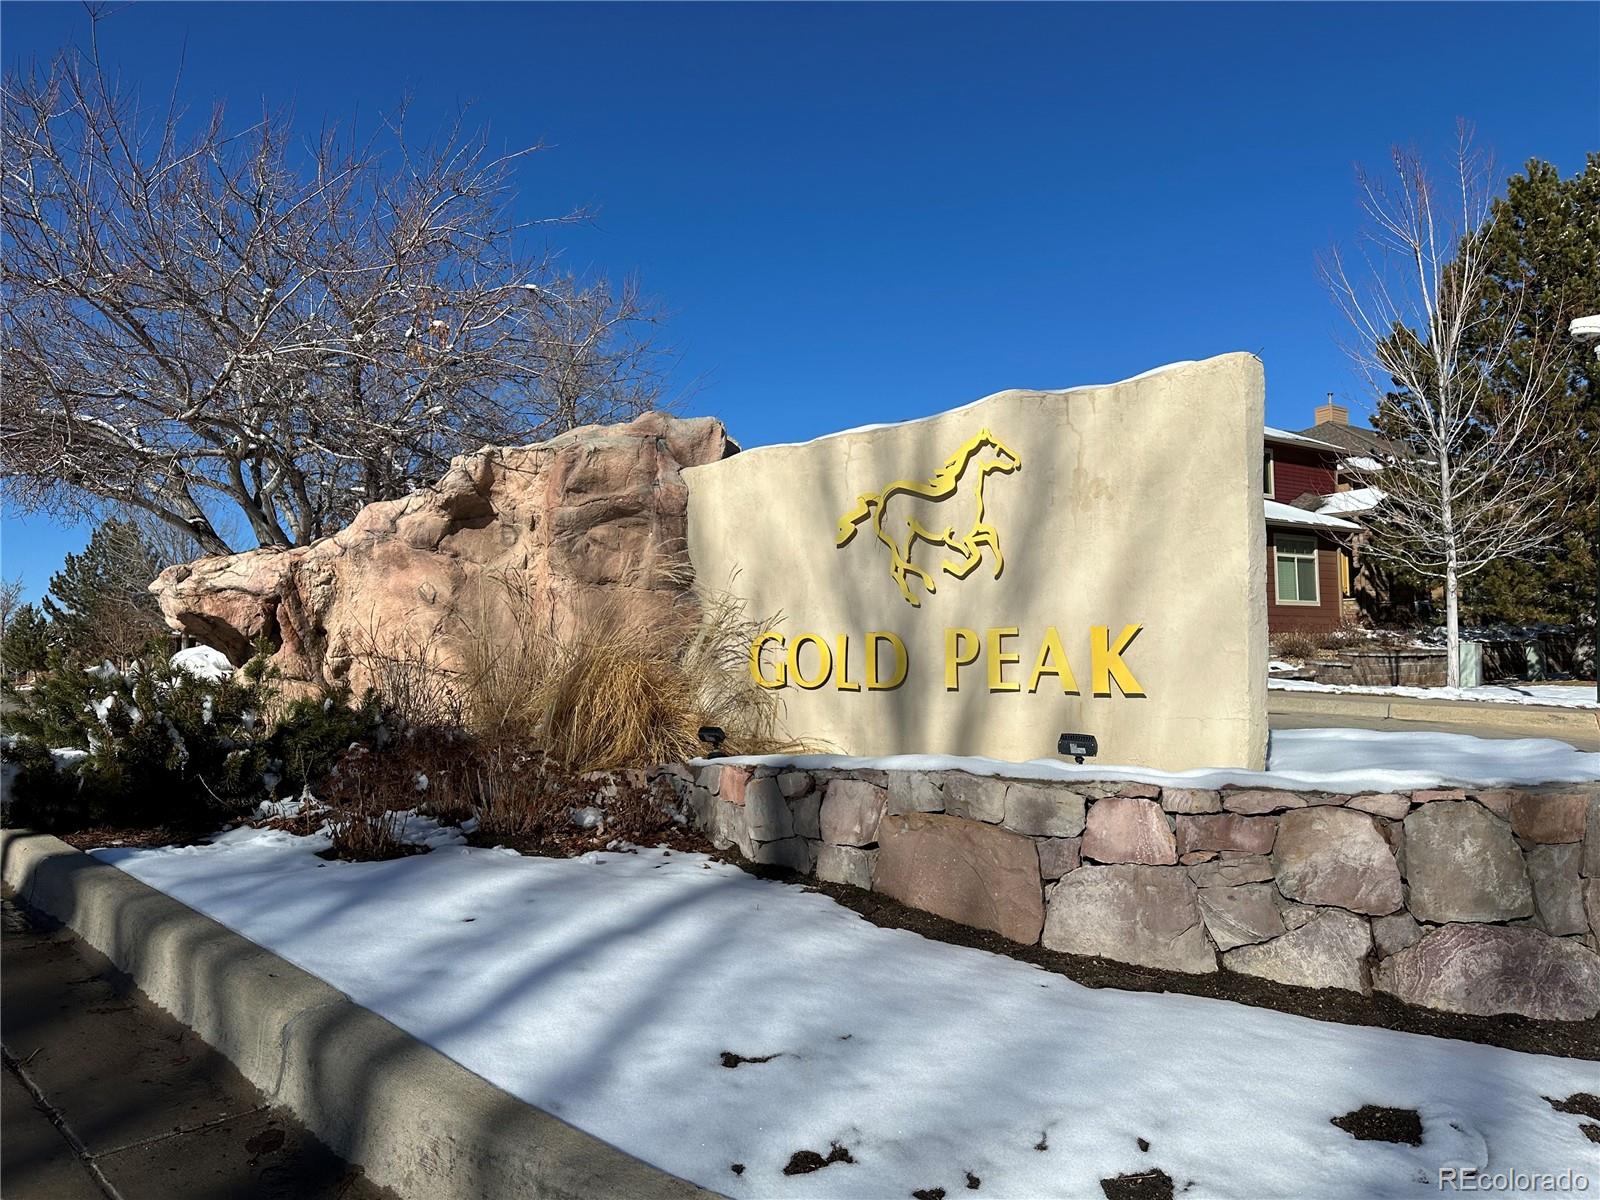 8566  gold peak drive, Highlands Ranch sold home. Closed on 2024-03-25 for $533,000.